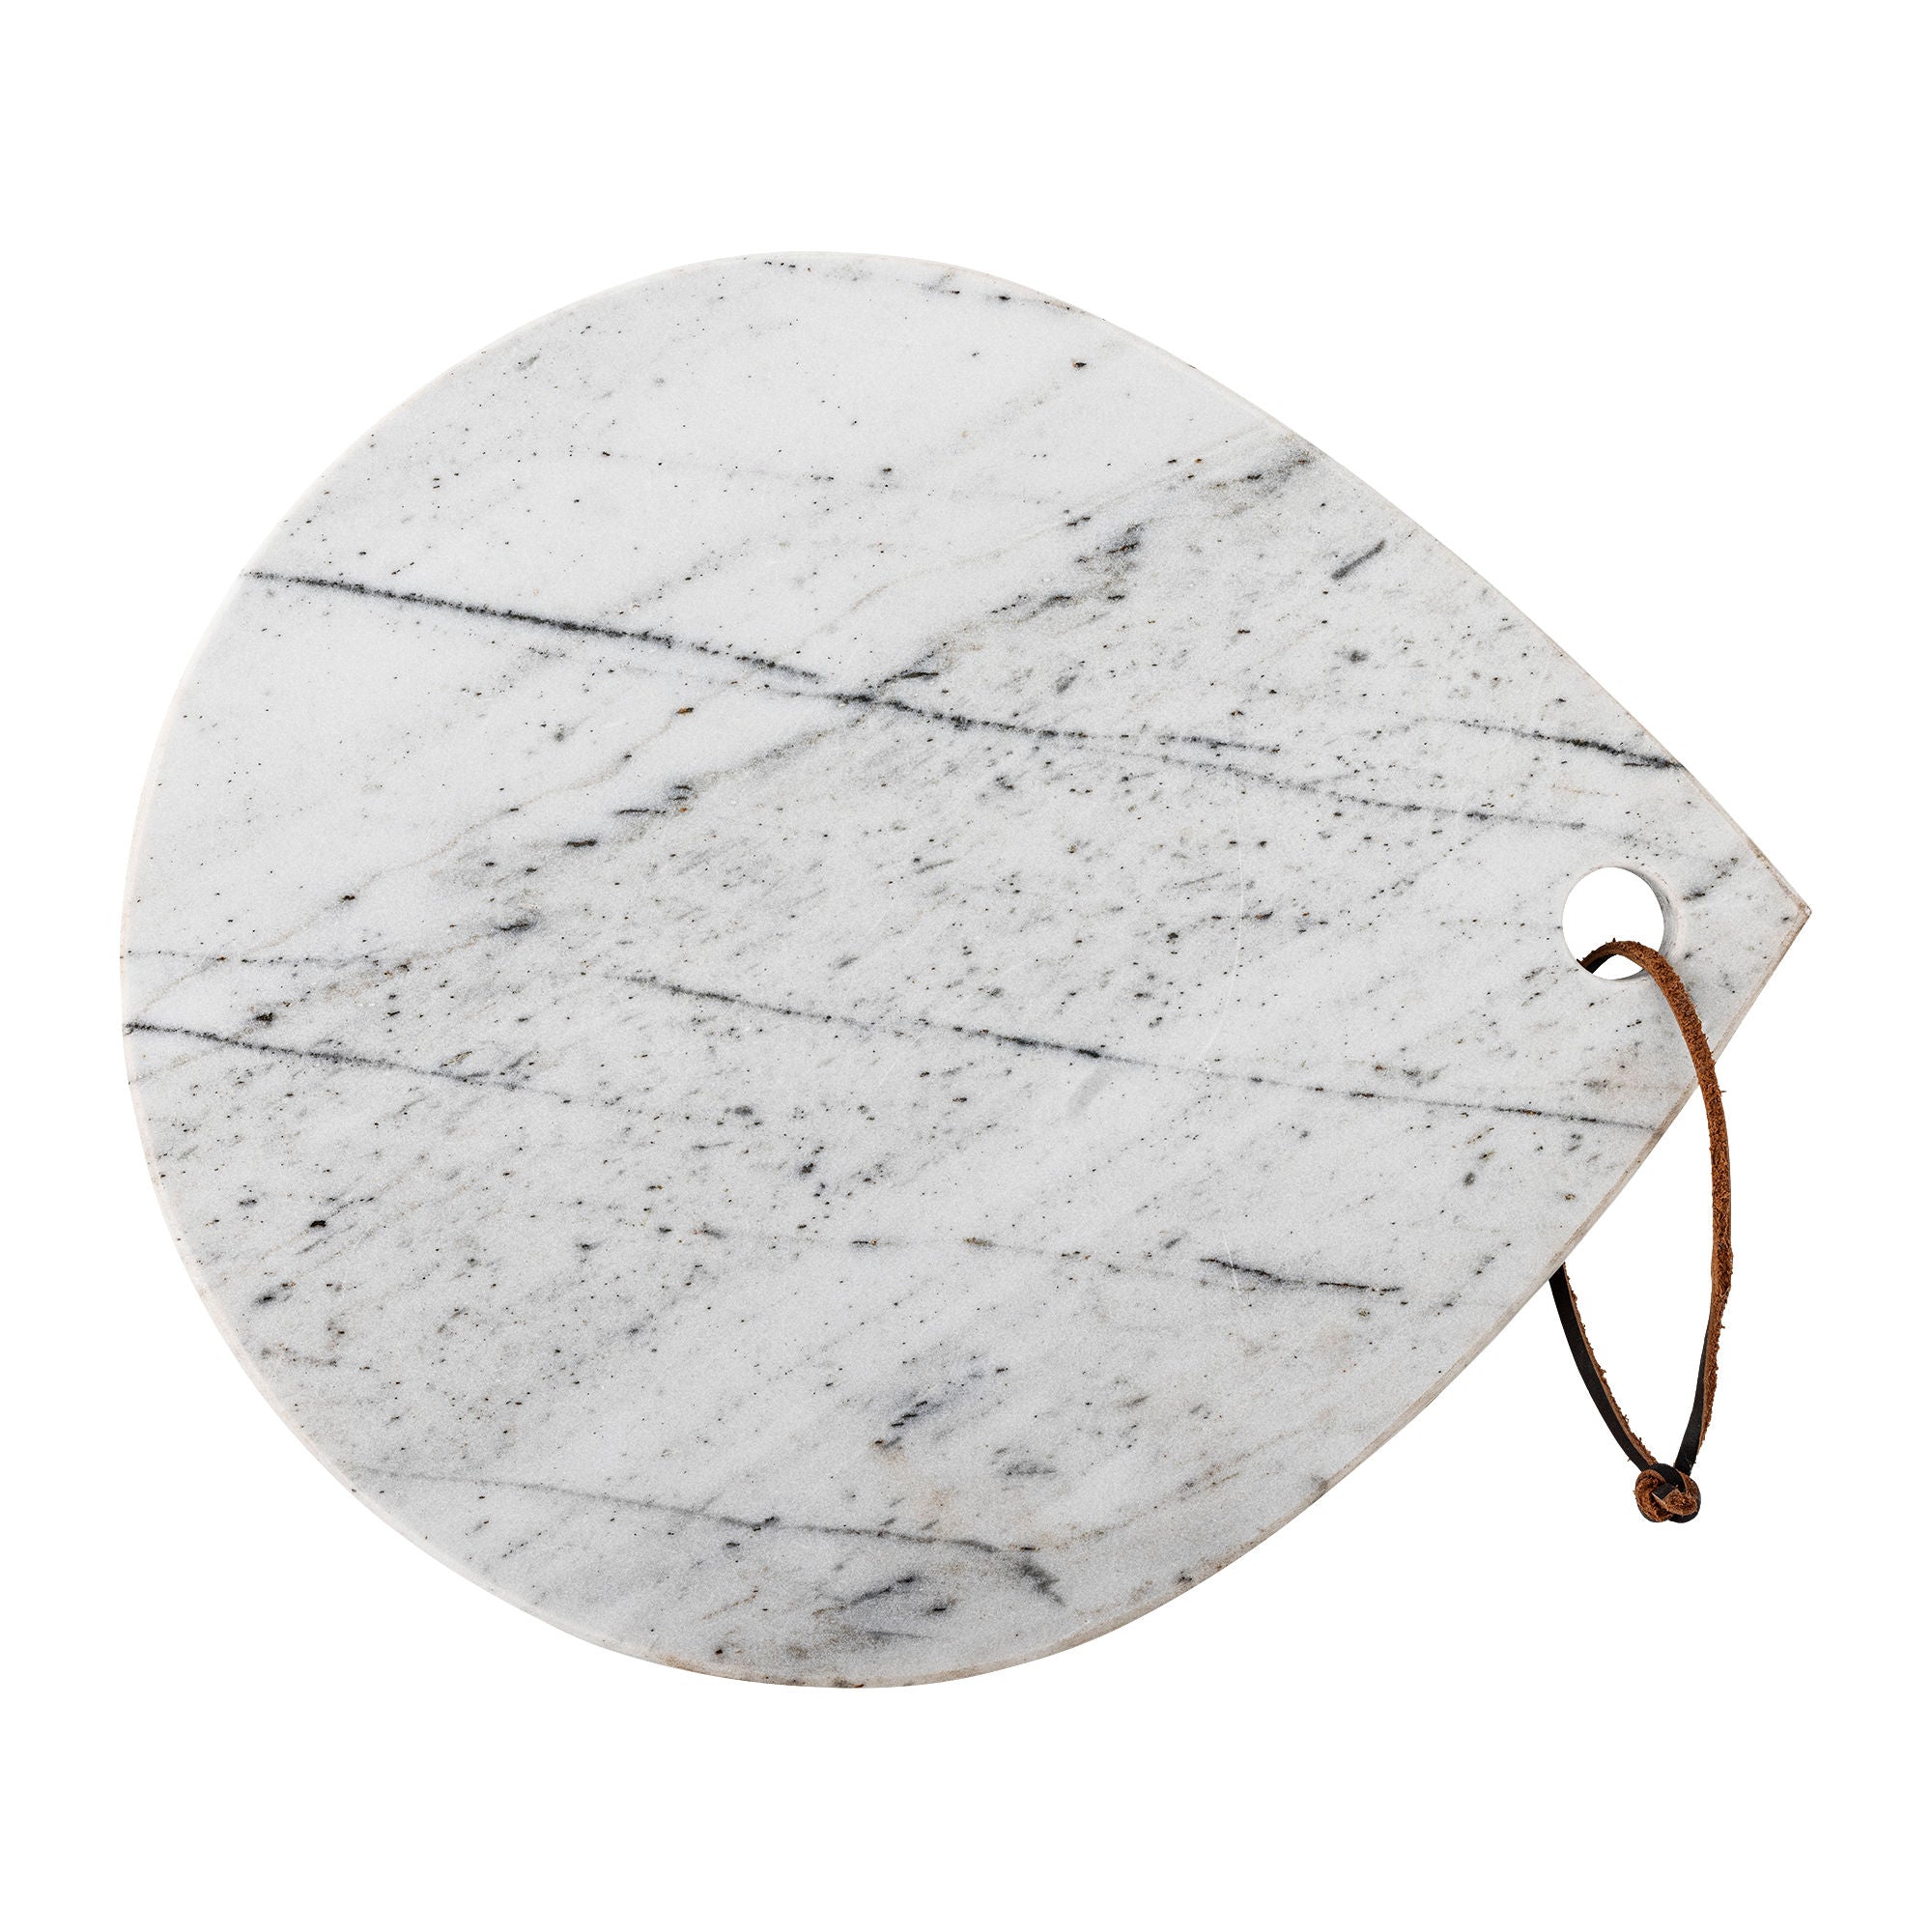 Creative Collection Maiko Cutting Board, White, Marble